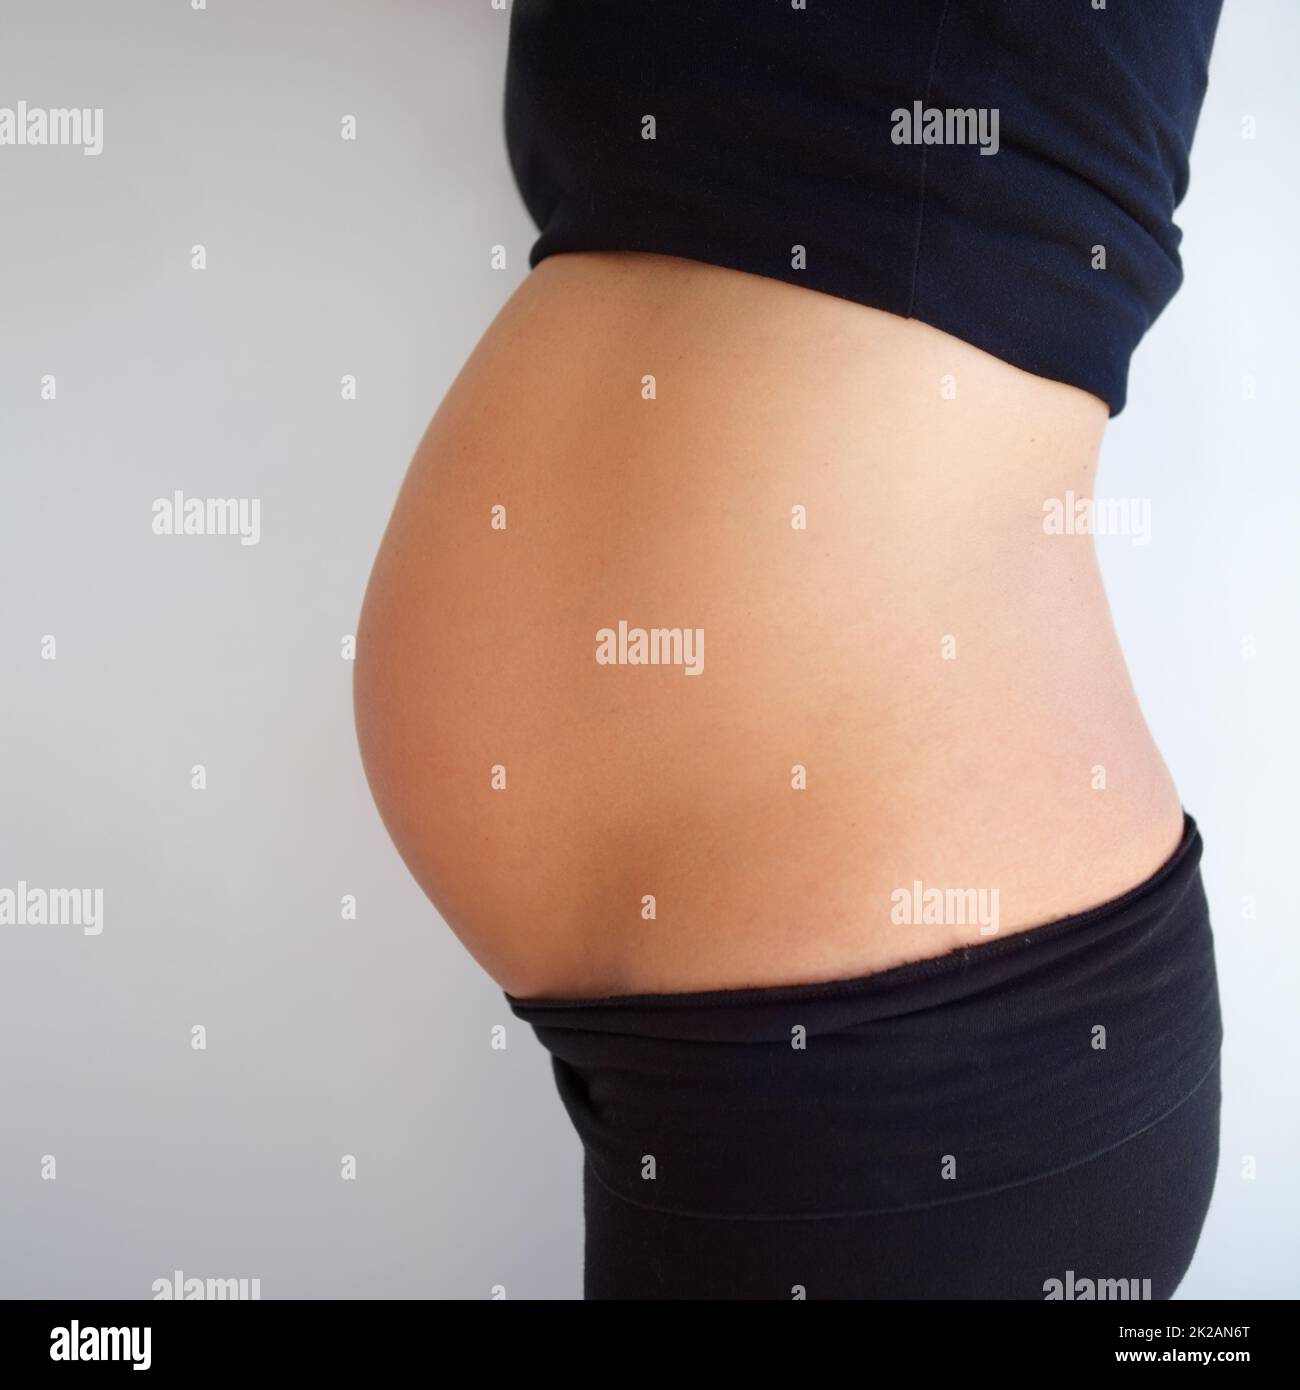 Pregnancy is beautiful. Cropped shot of a side angle view of pregnant womanamp039s stomach. Stock Photo